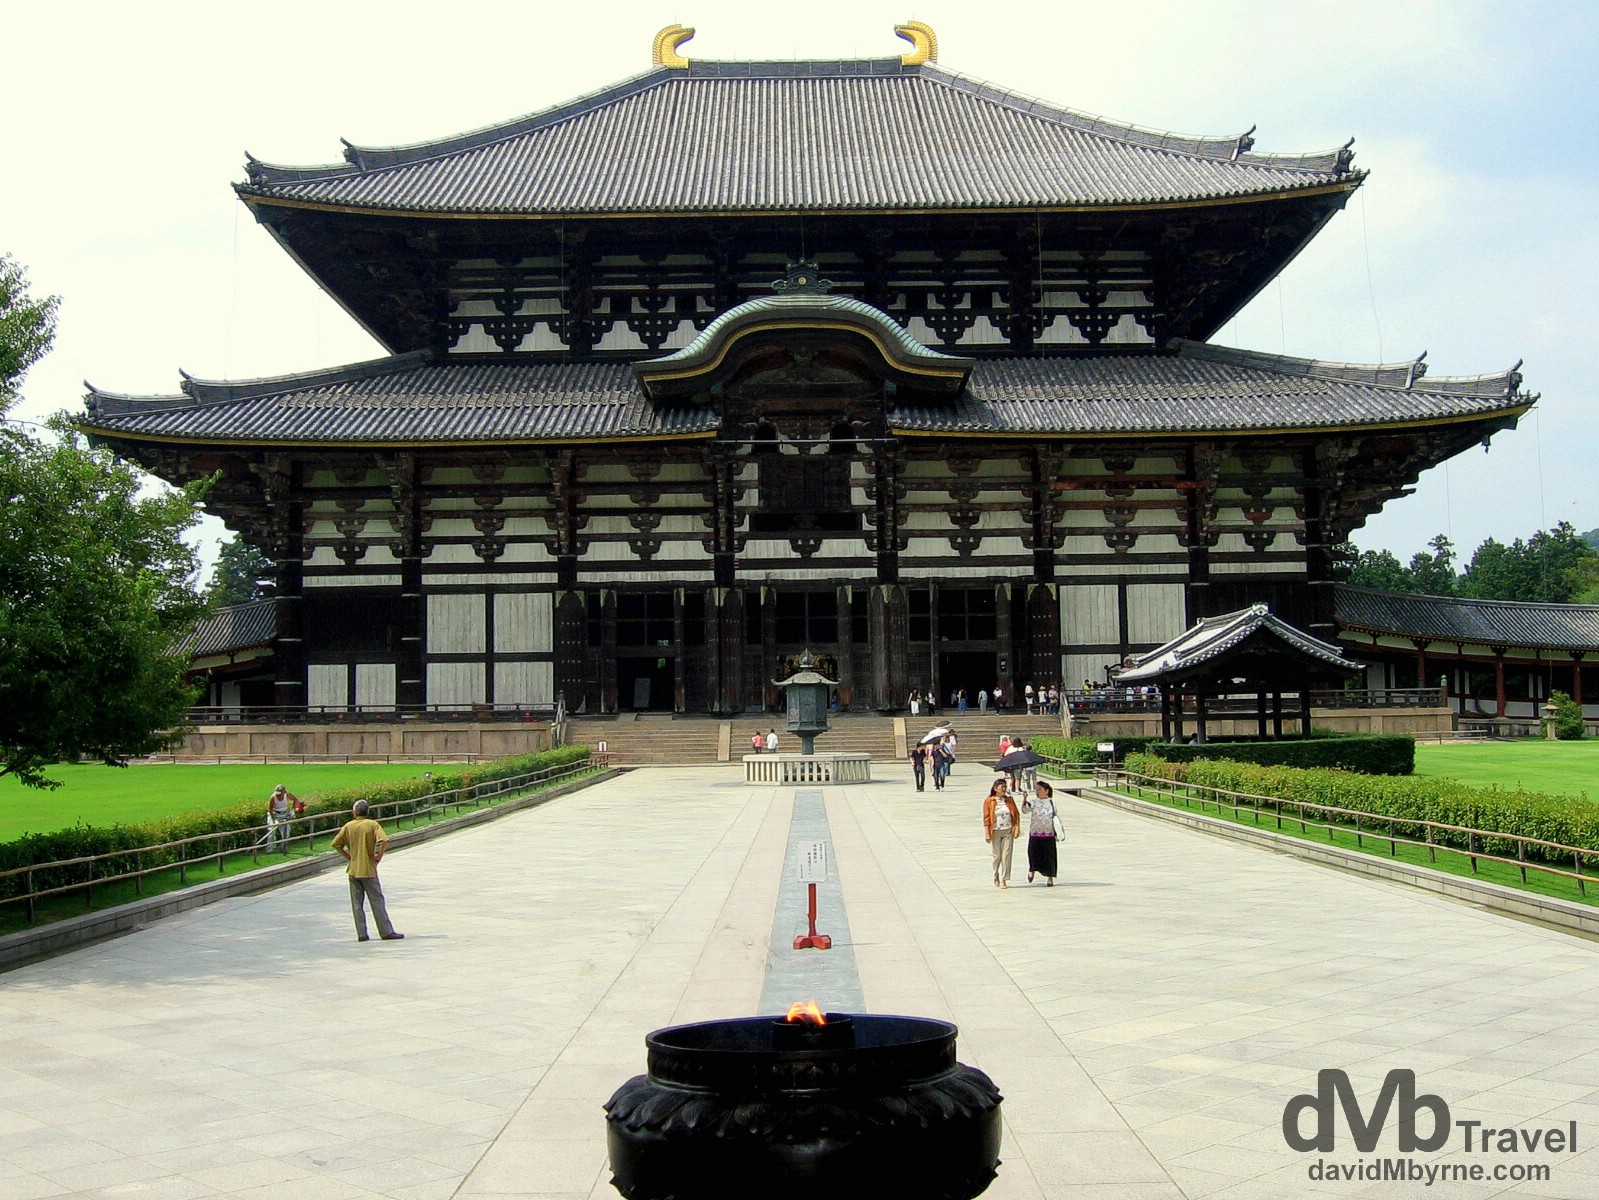 The largest wooden building in the world, the Great Buddha Hall of the Todai-ji is a Buddhist temple complex in Nara, Honshu, Japan. July 20th 2005.  